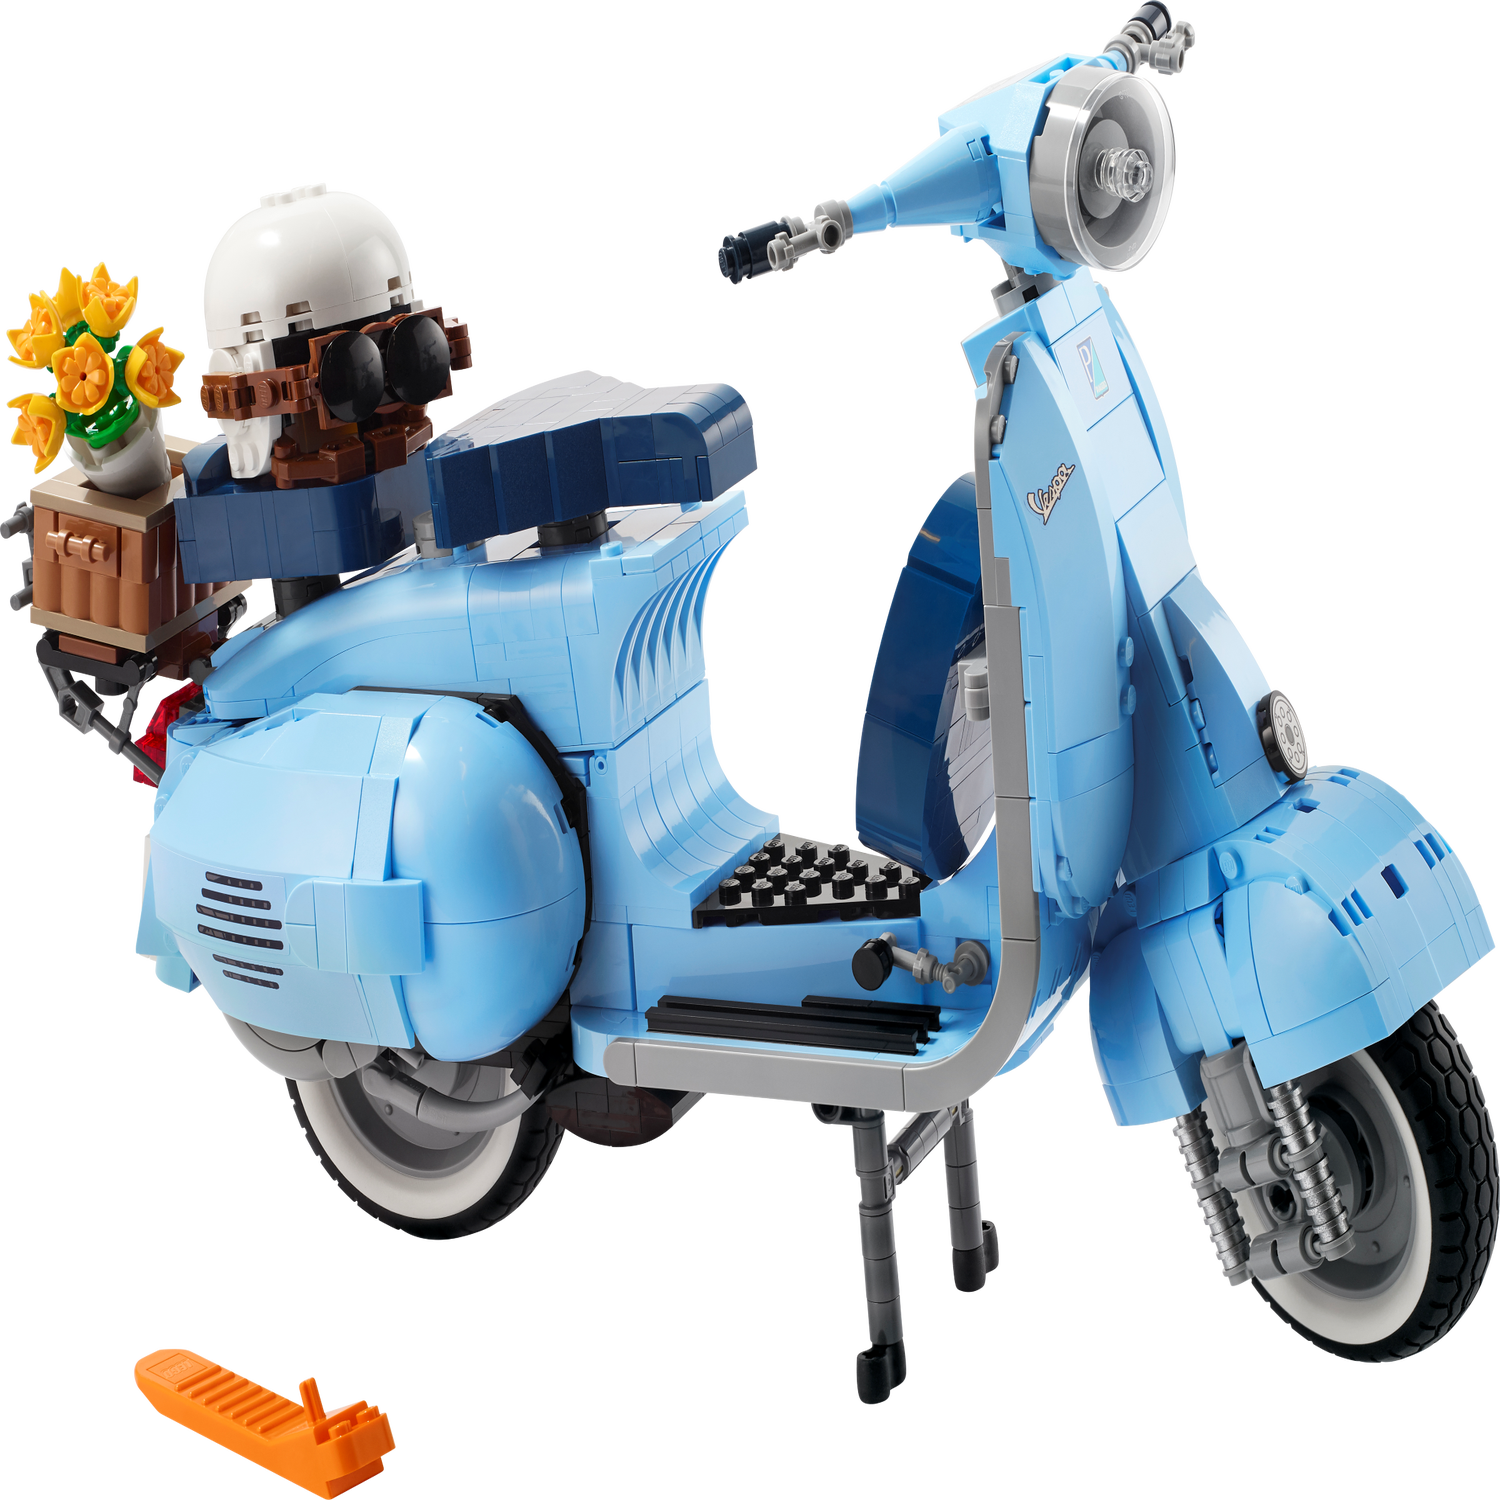 Build a Stylish Italian Ride with the LEGO Vespa 125 - The Toy Insider